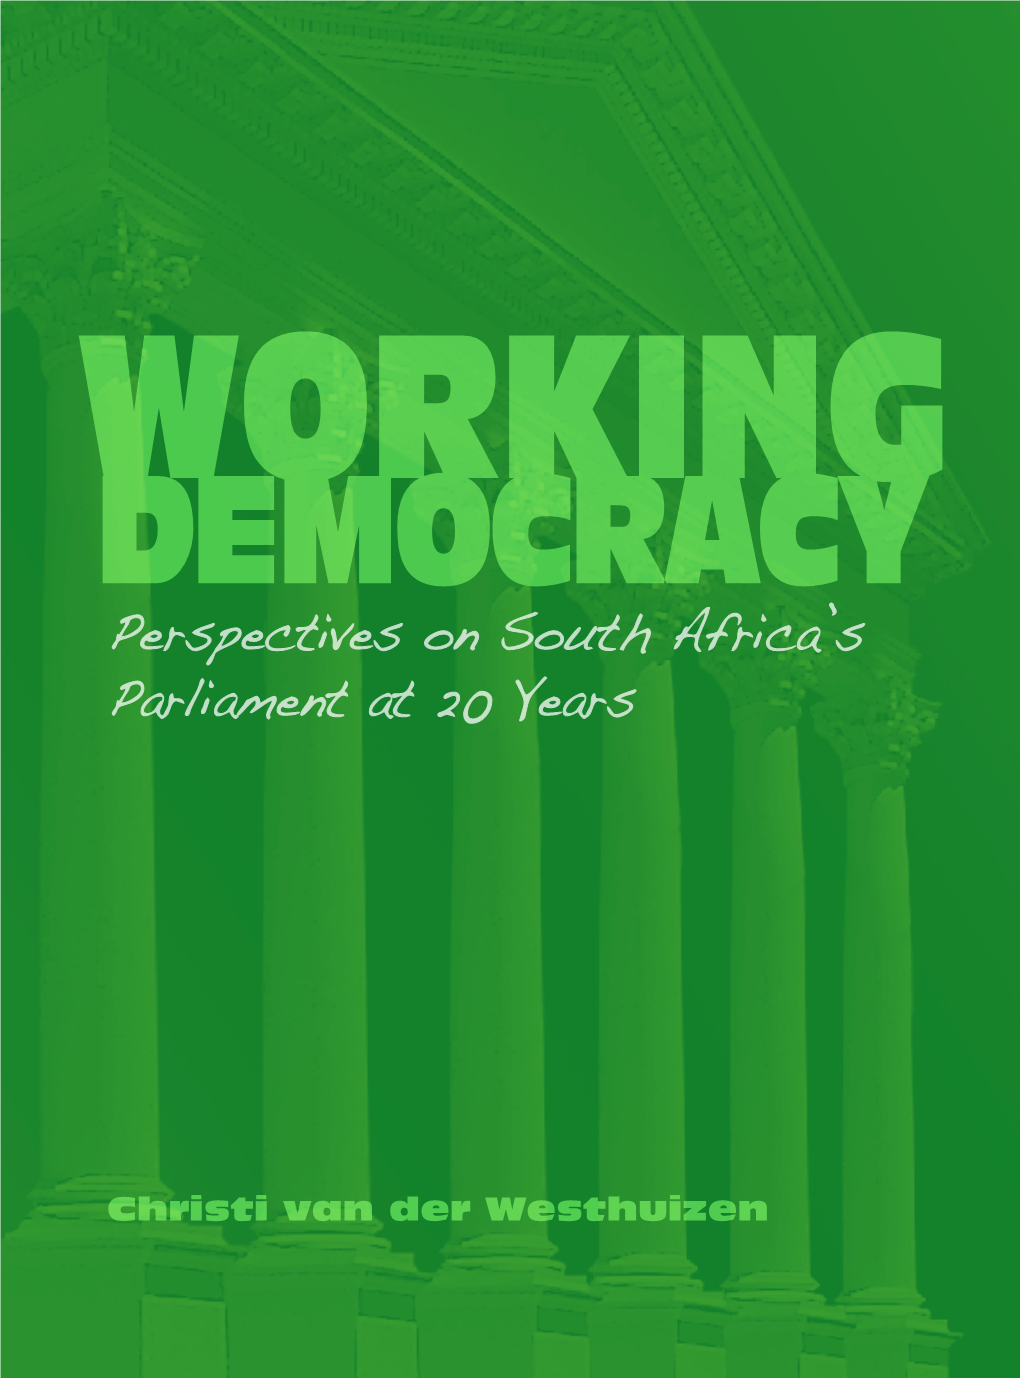 Perspectives on South Africa's Parliament at 20 Years